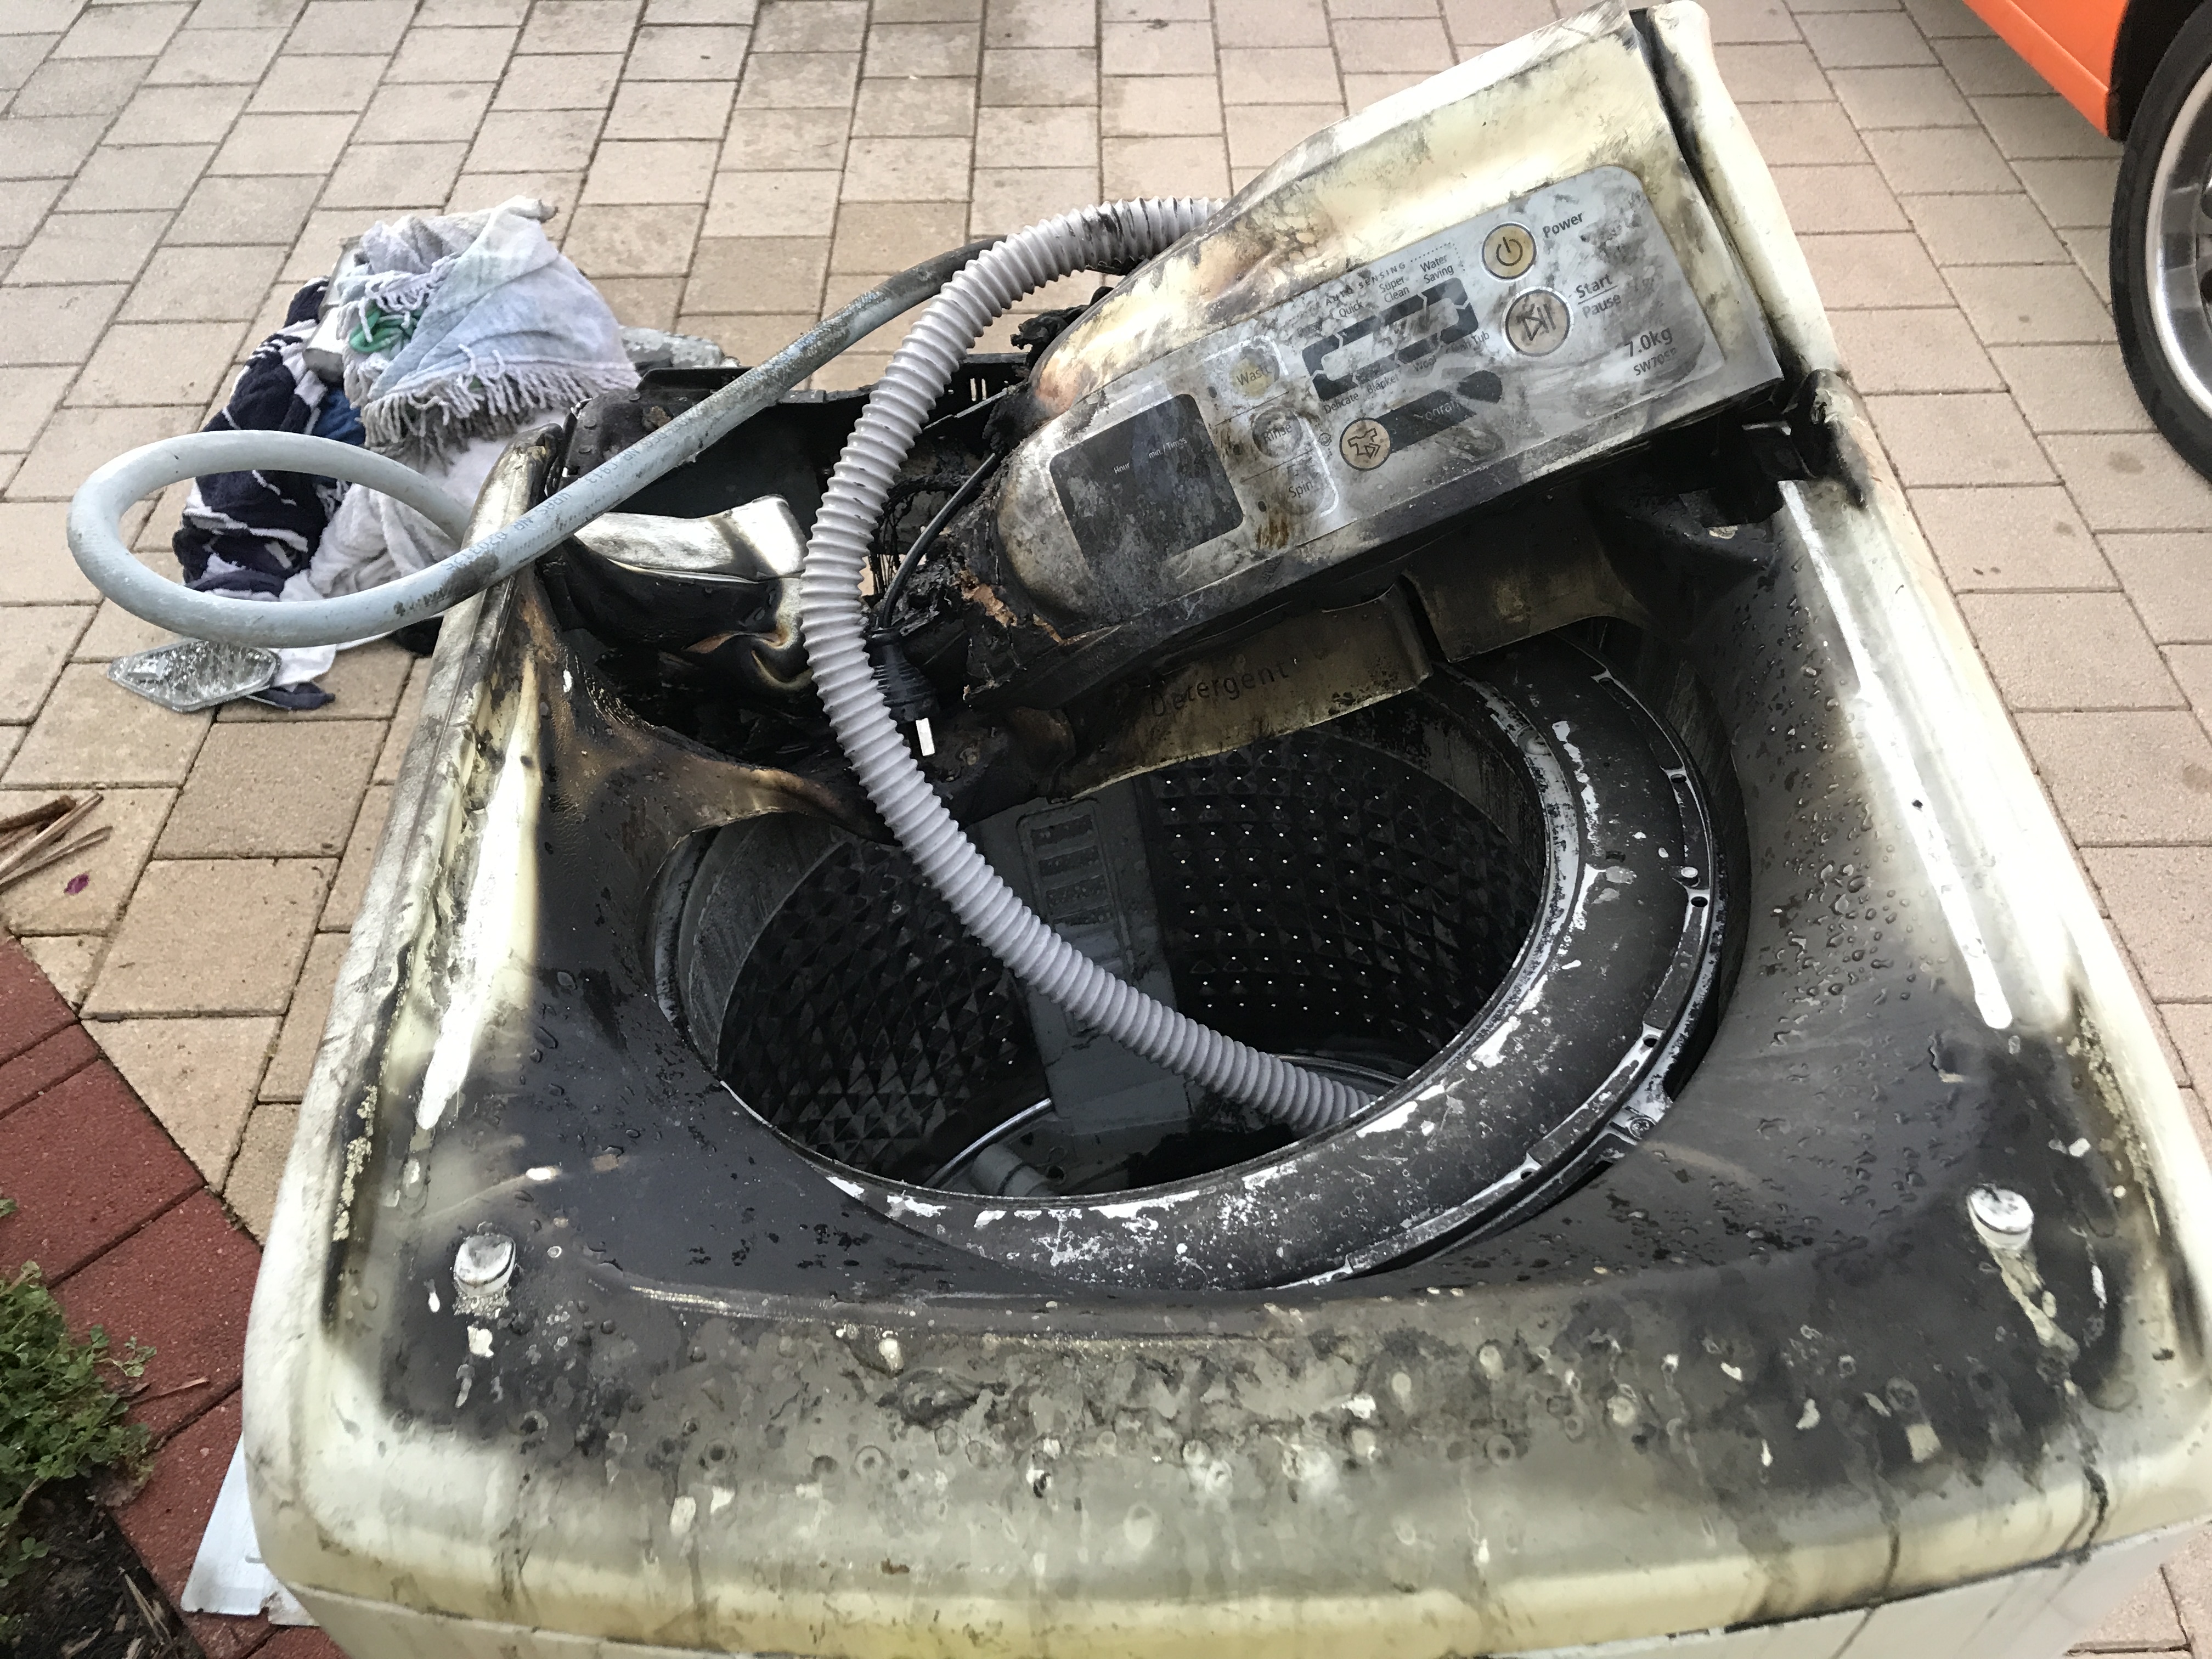 Washing machine fire Armadale2 - supplied by DFES